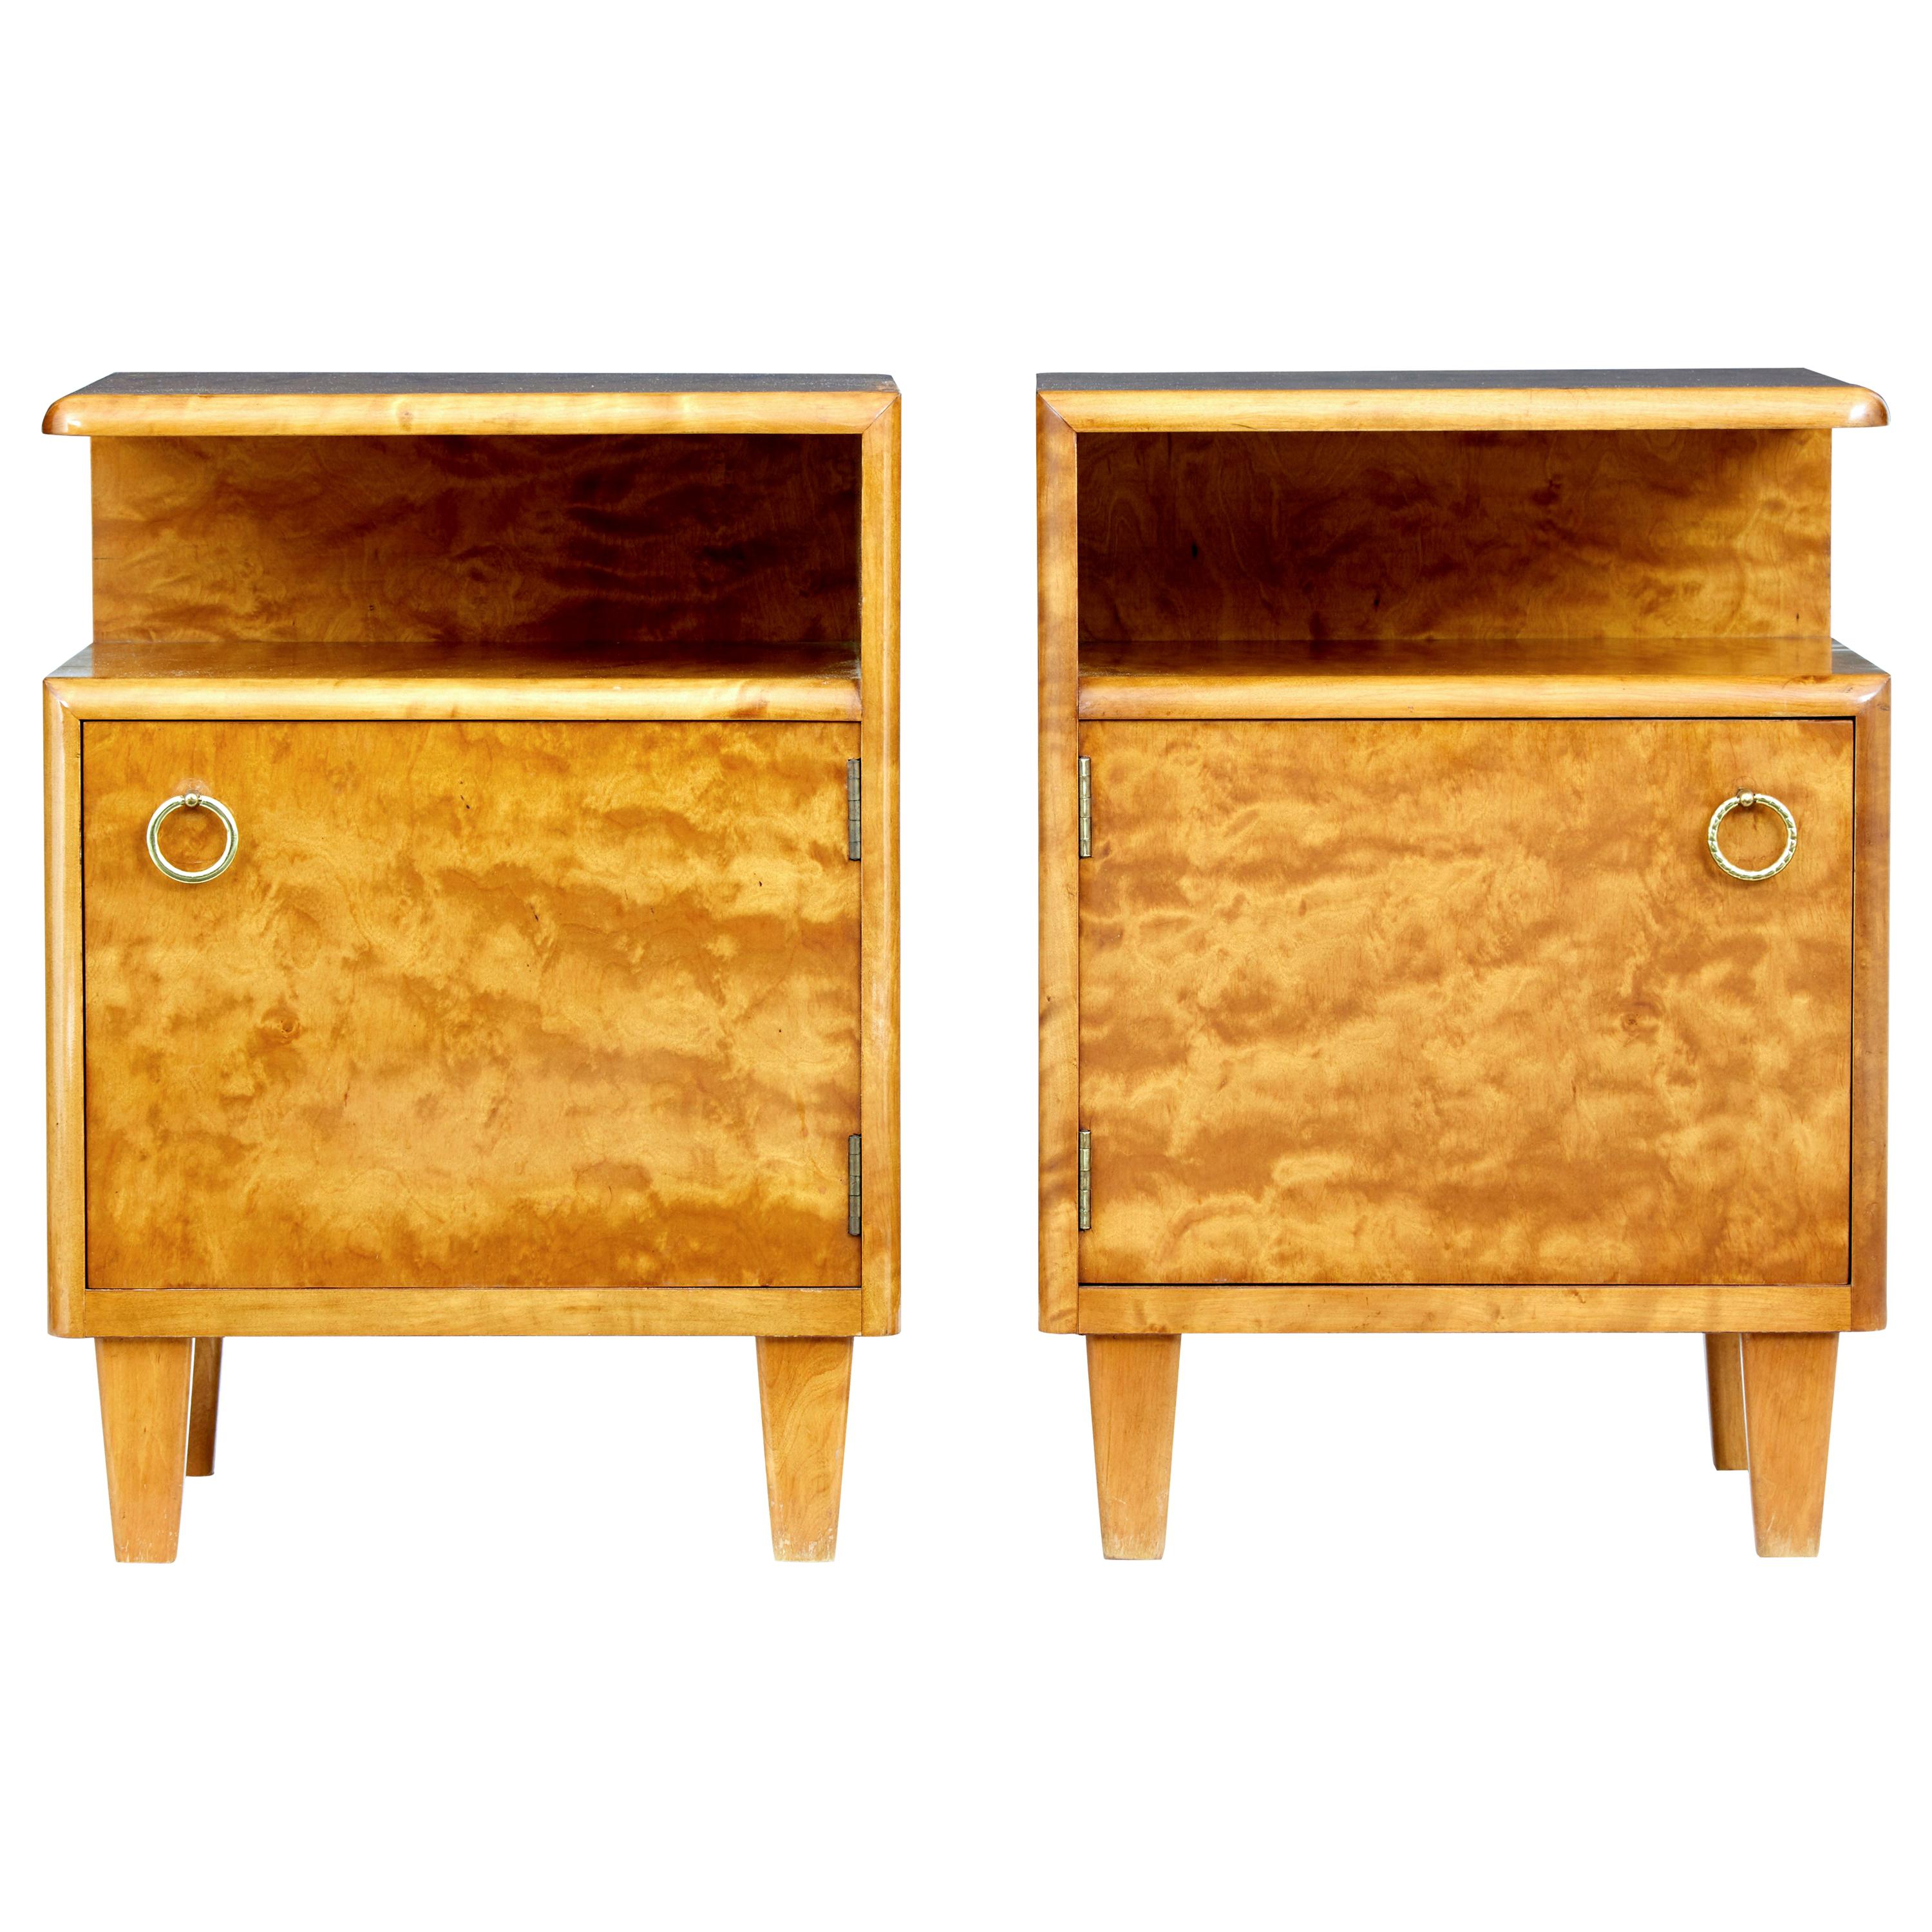 Pair of Mid-20th Century Swedish Birch Bedside Tables by Mobel AB Altorp